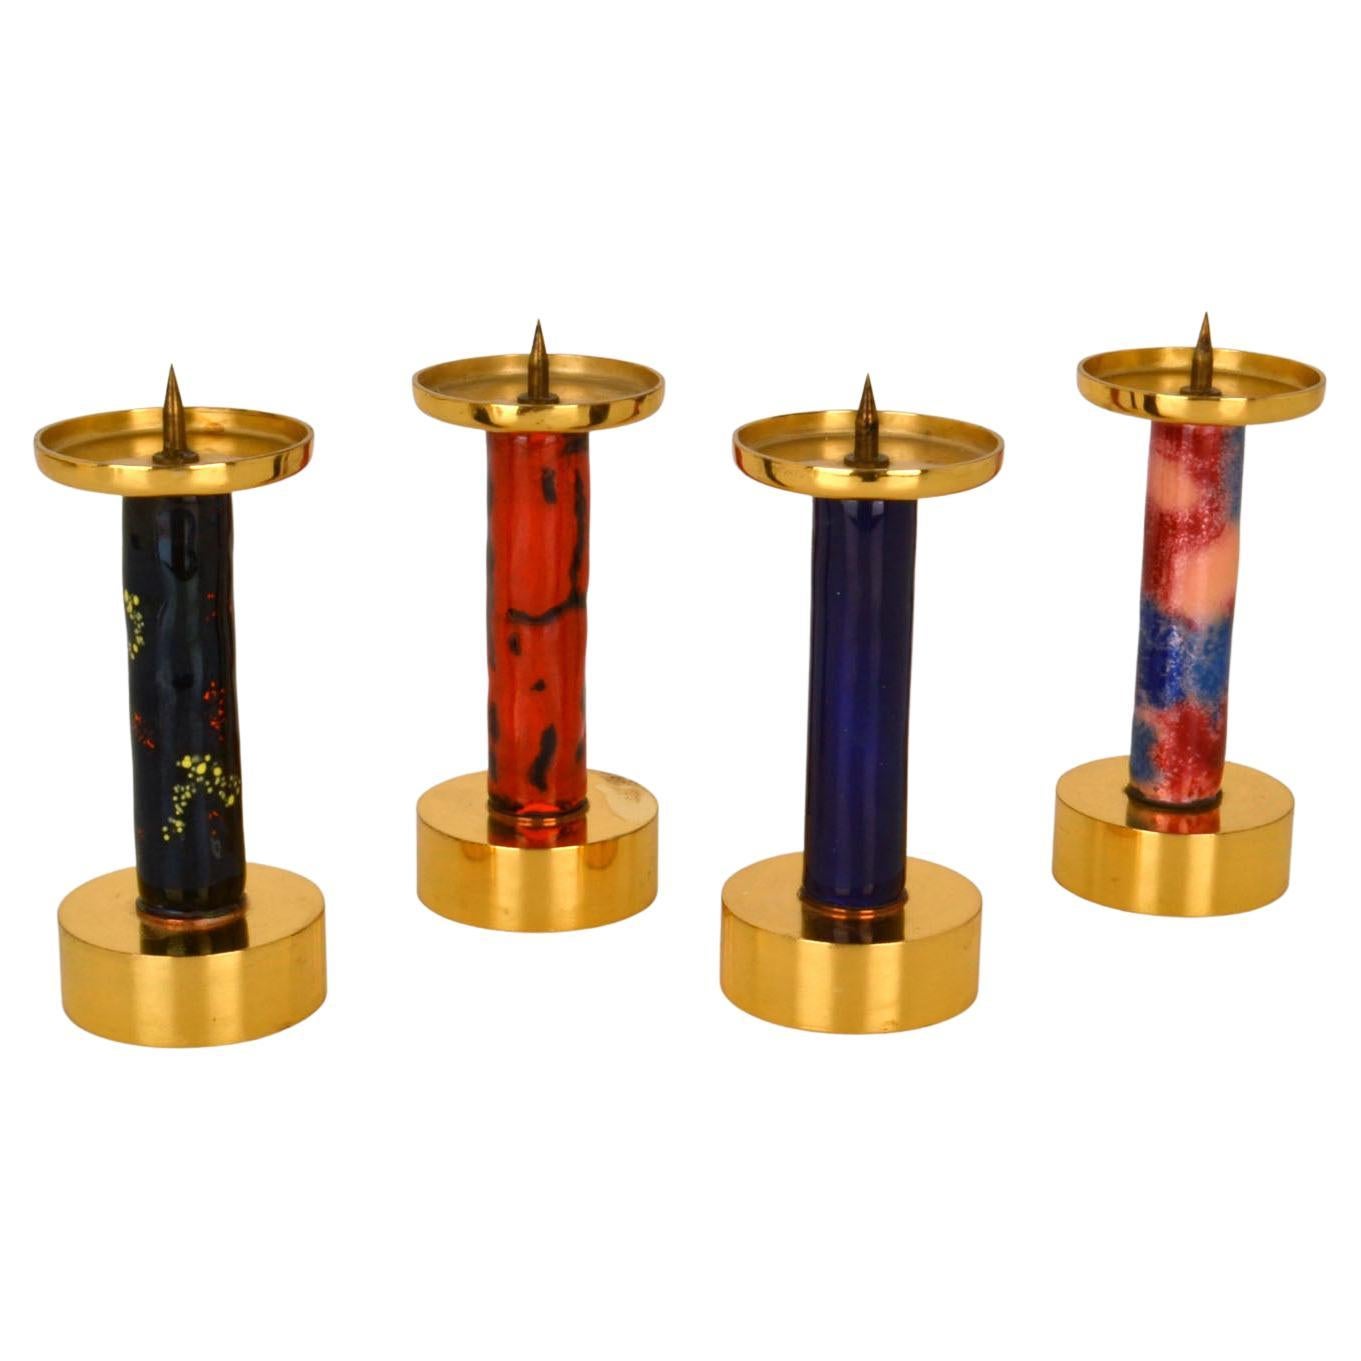 Four Enameled and Gilded Brass Candle Sticks For Sale